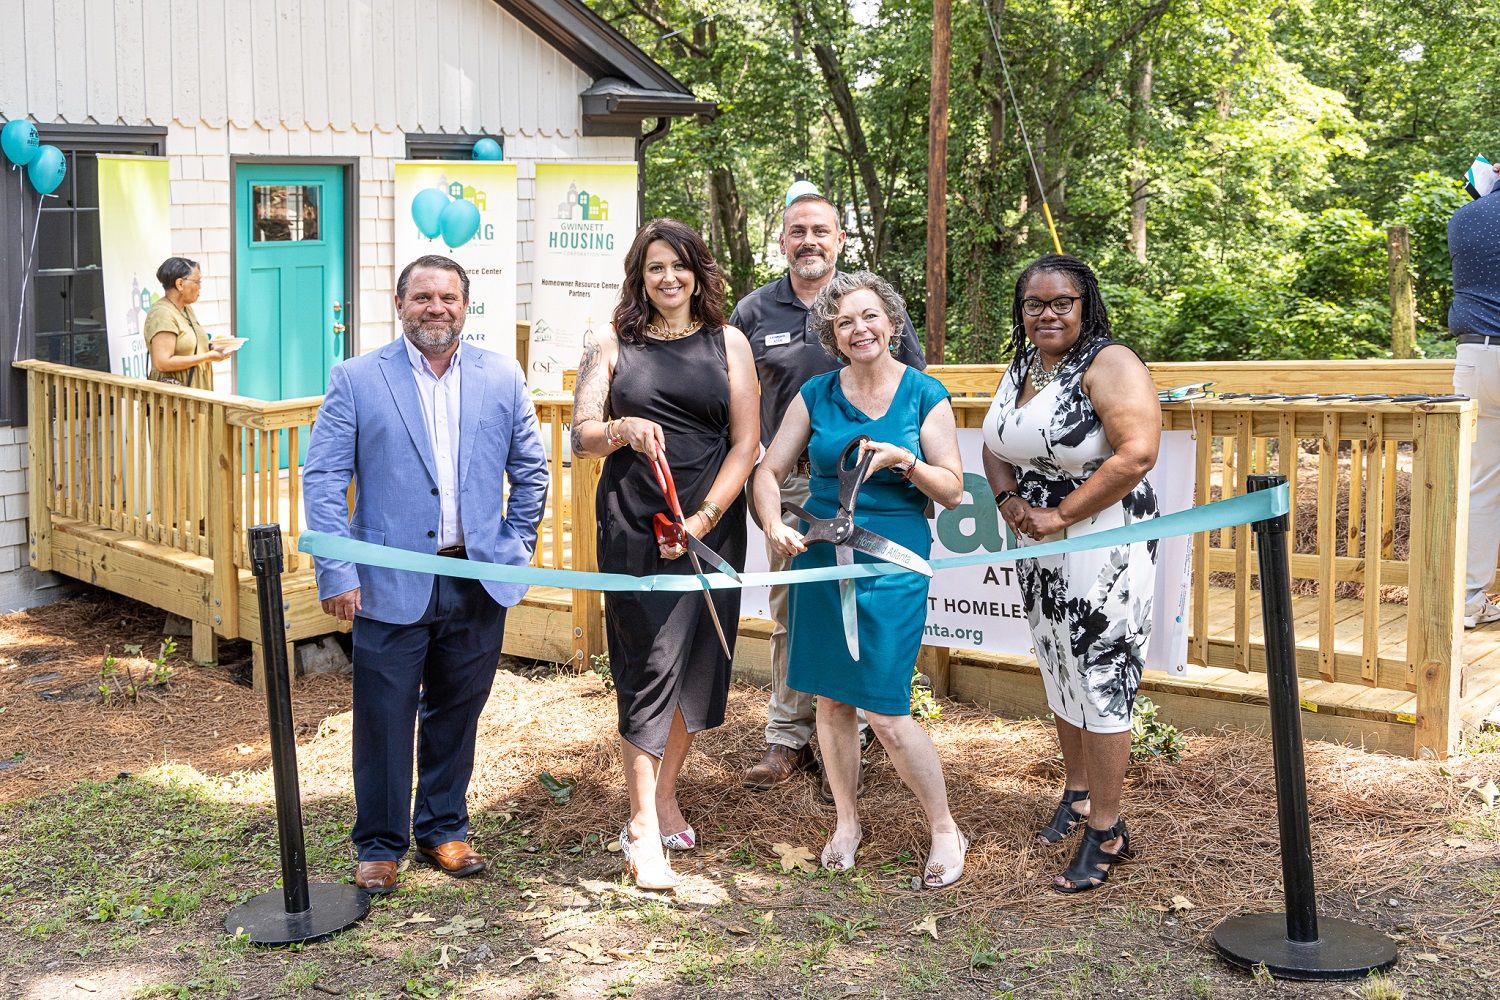 Left to right, Tom Bowers of Lennar, Lelja Prljaca of GHC, Adam Paterson of Lennar, Mandy Crater of Homeaid Atlanta and Karen Ramsey of GHC